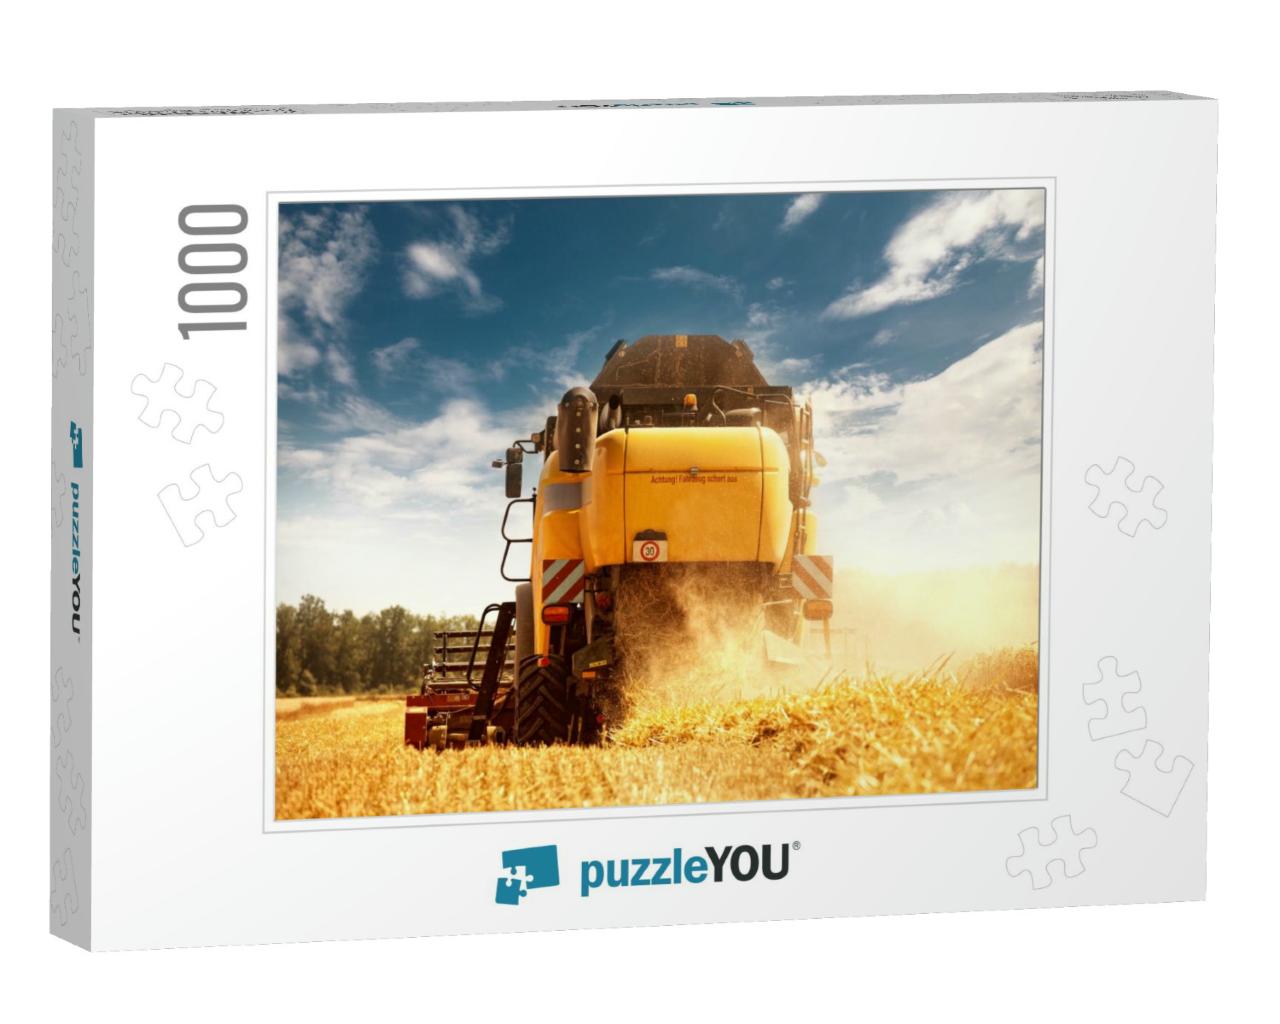 Harvester on Work with Straw Dust in Air... Jigsaw Puzzle with 1000 pieces